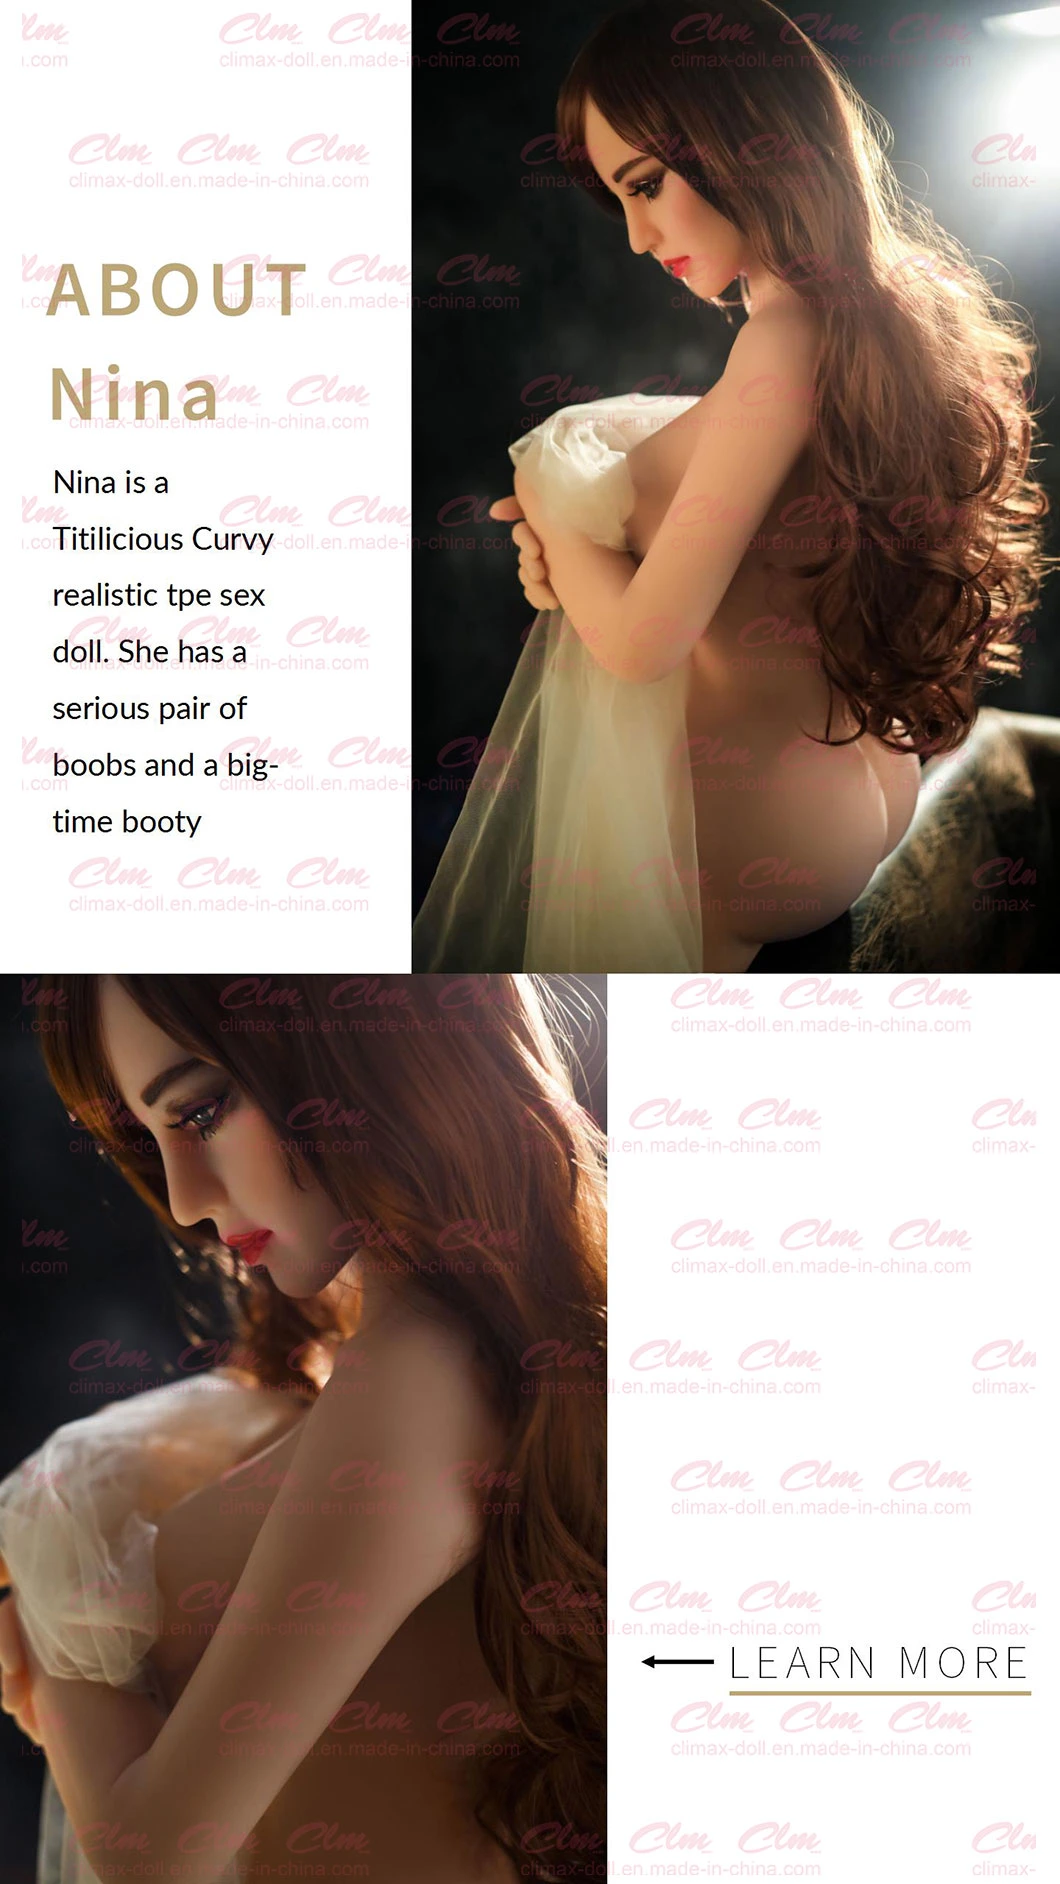 Clm (Climax Doll) 158cm Realistic TPE Sexdoll Sexy Artificial Girl Silicone Big Breast Real Sex Doll Sex Toy for Men